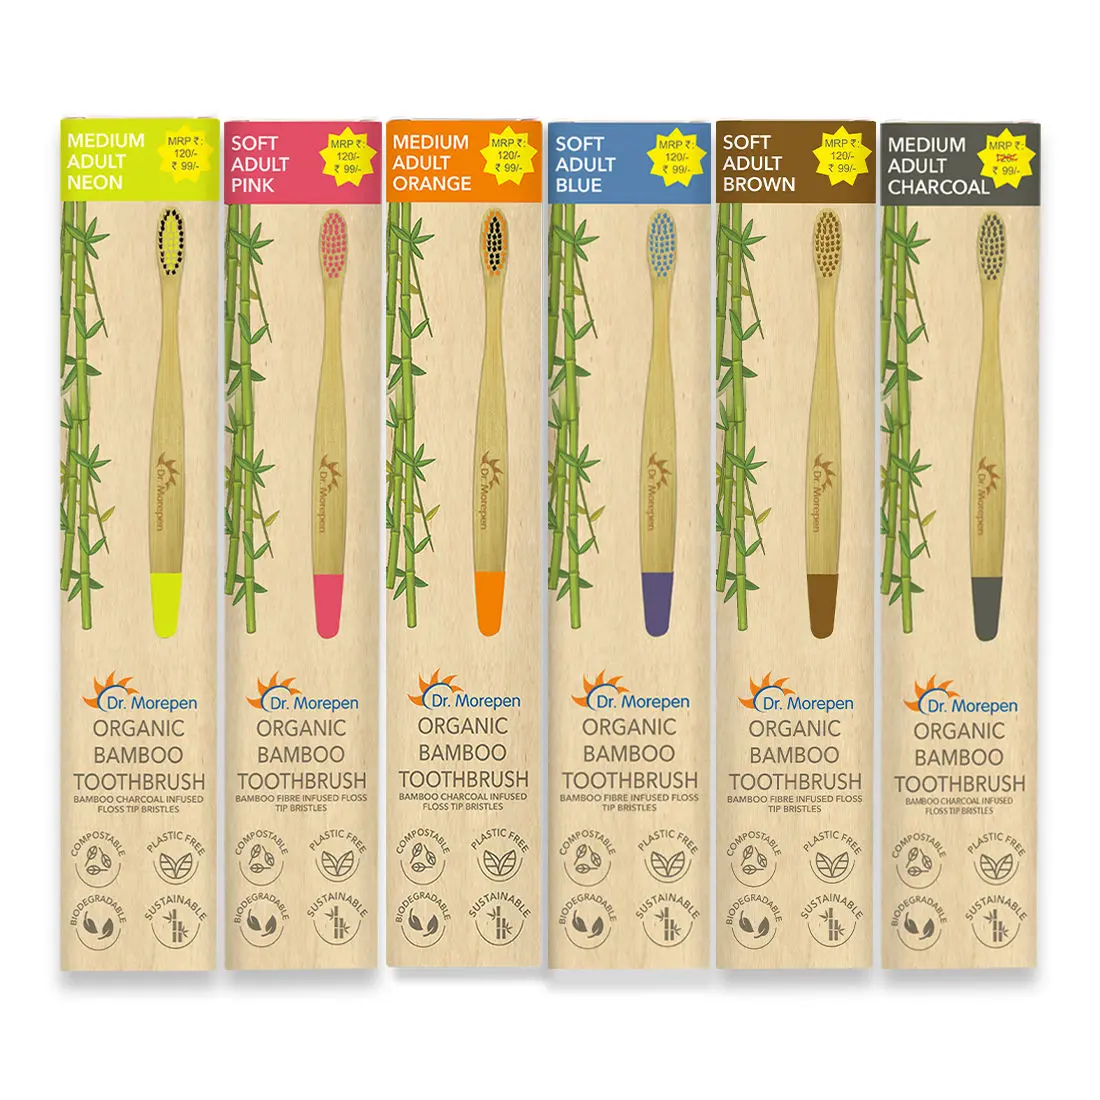 DR. MOREPEN Organic Bamboo Toothbrush For Adults Pack of 6